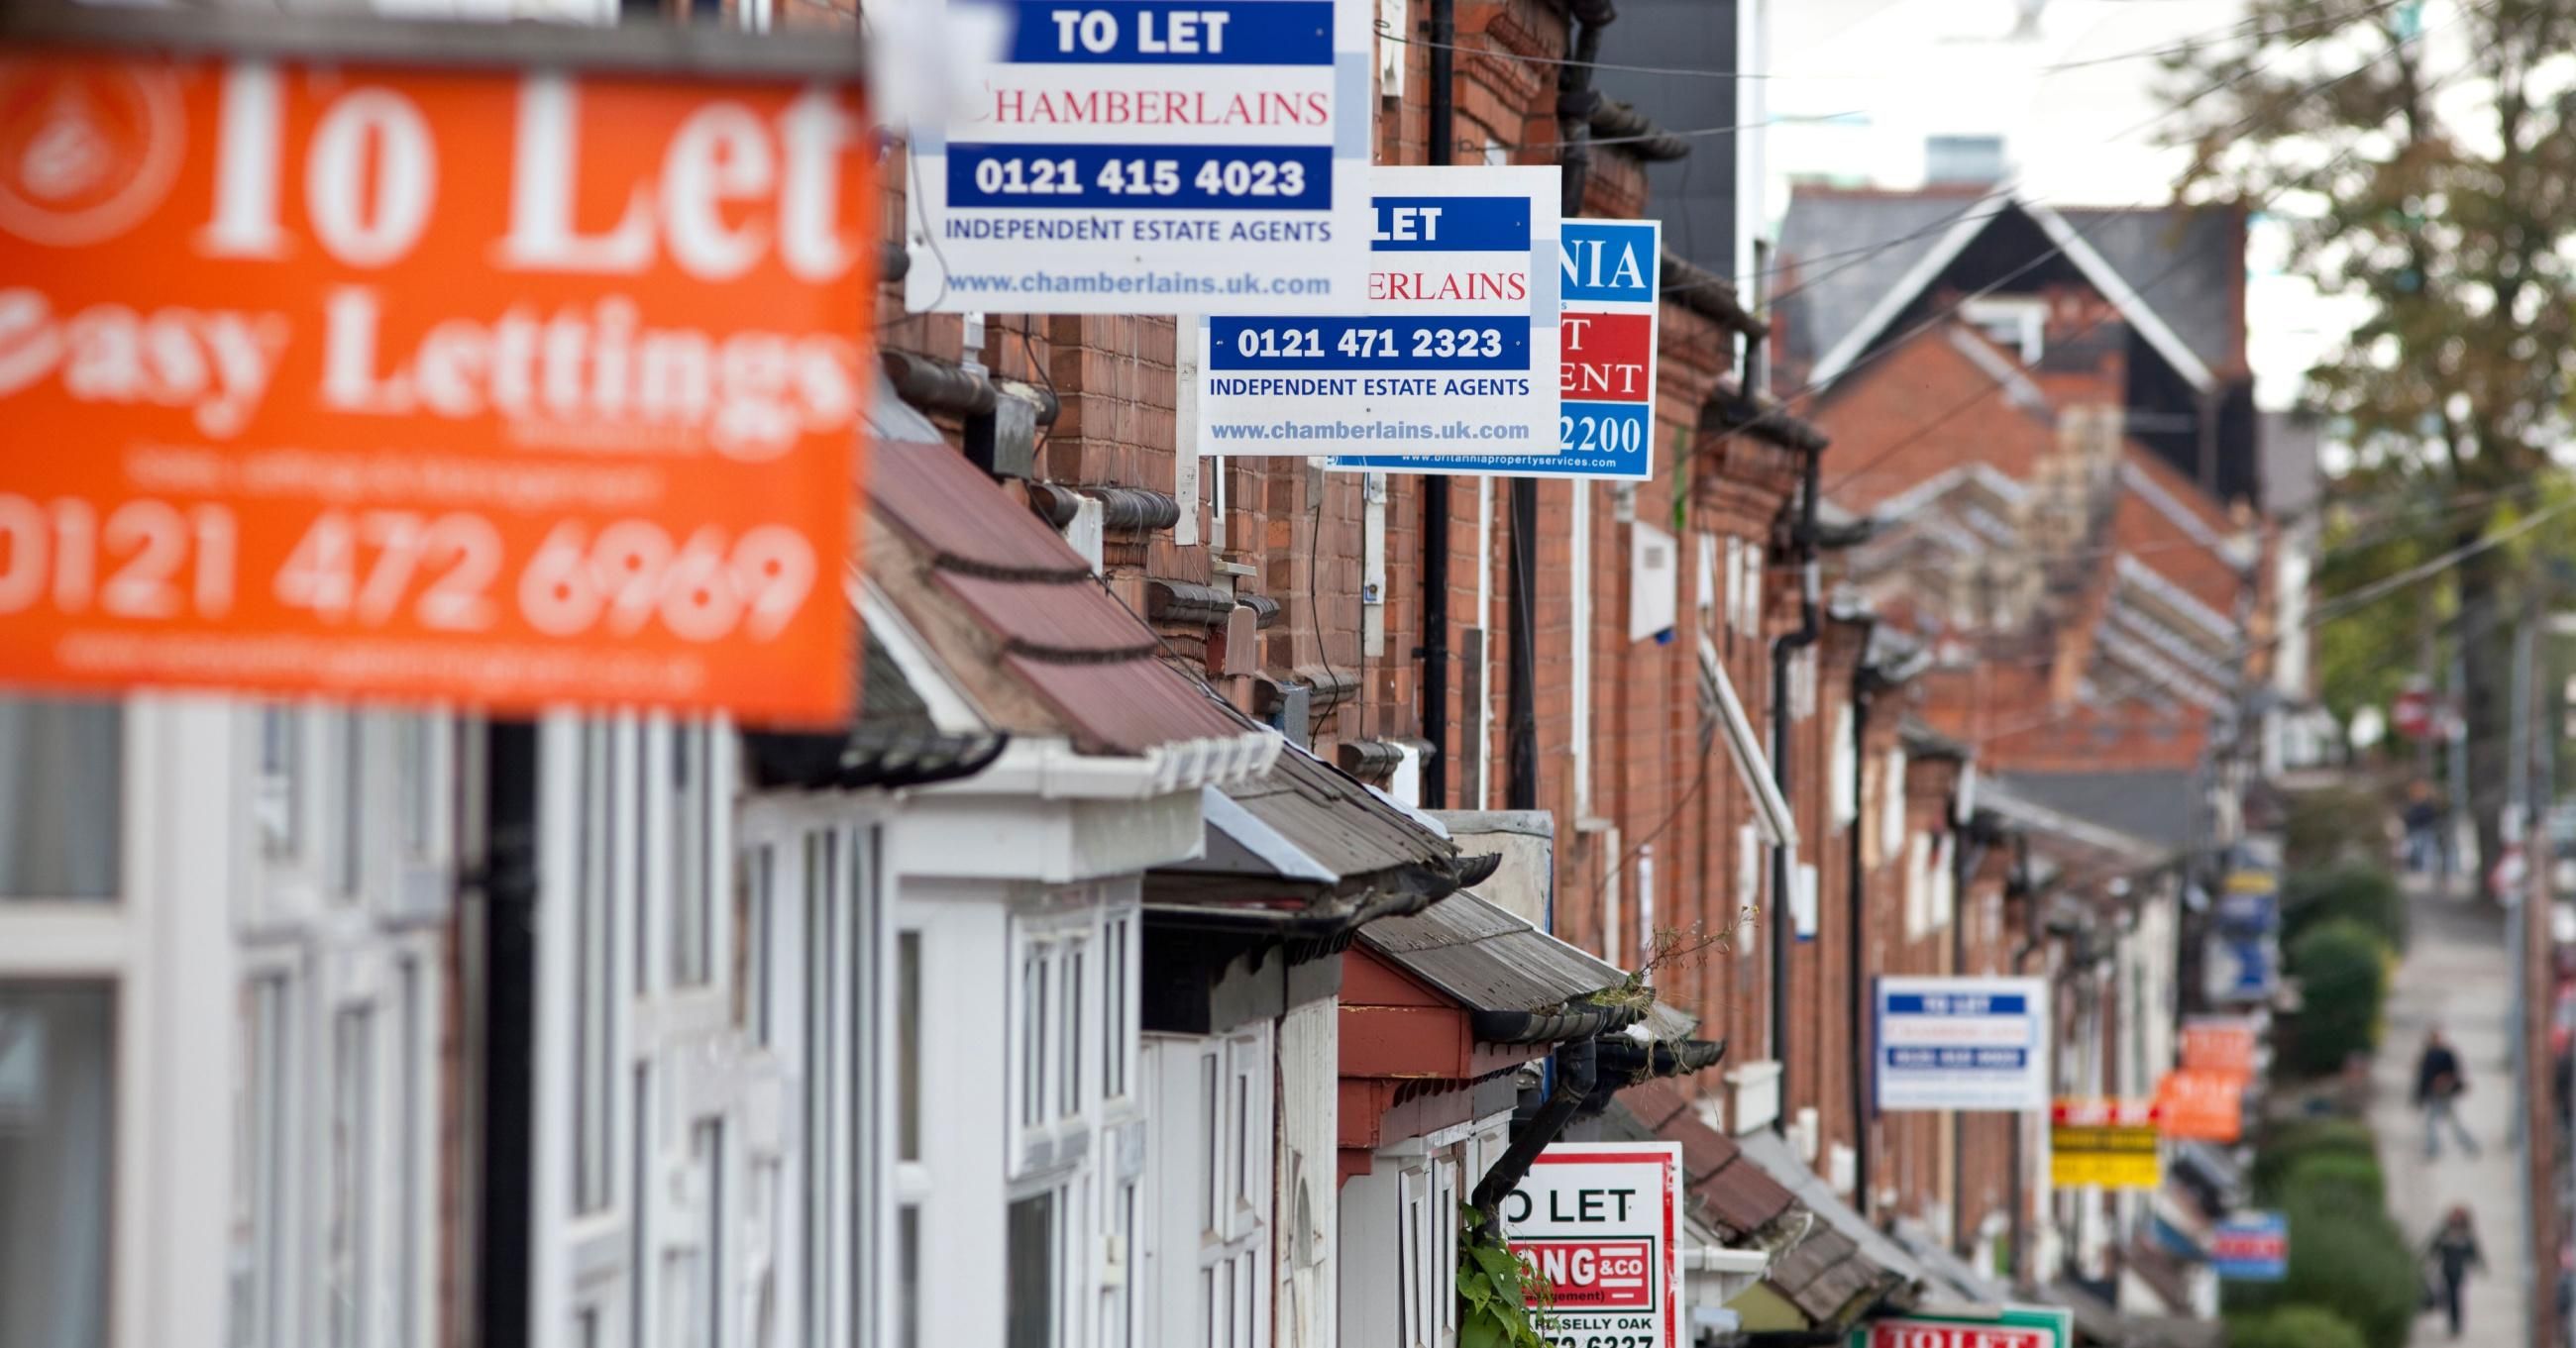 As the Covid eviction ban ends, we are likely to surge in court action by landlords. (Photo: John James/Alamy Stock)